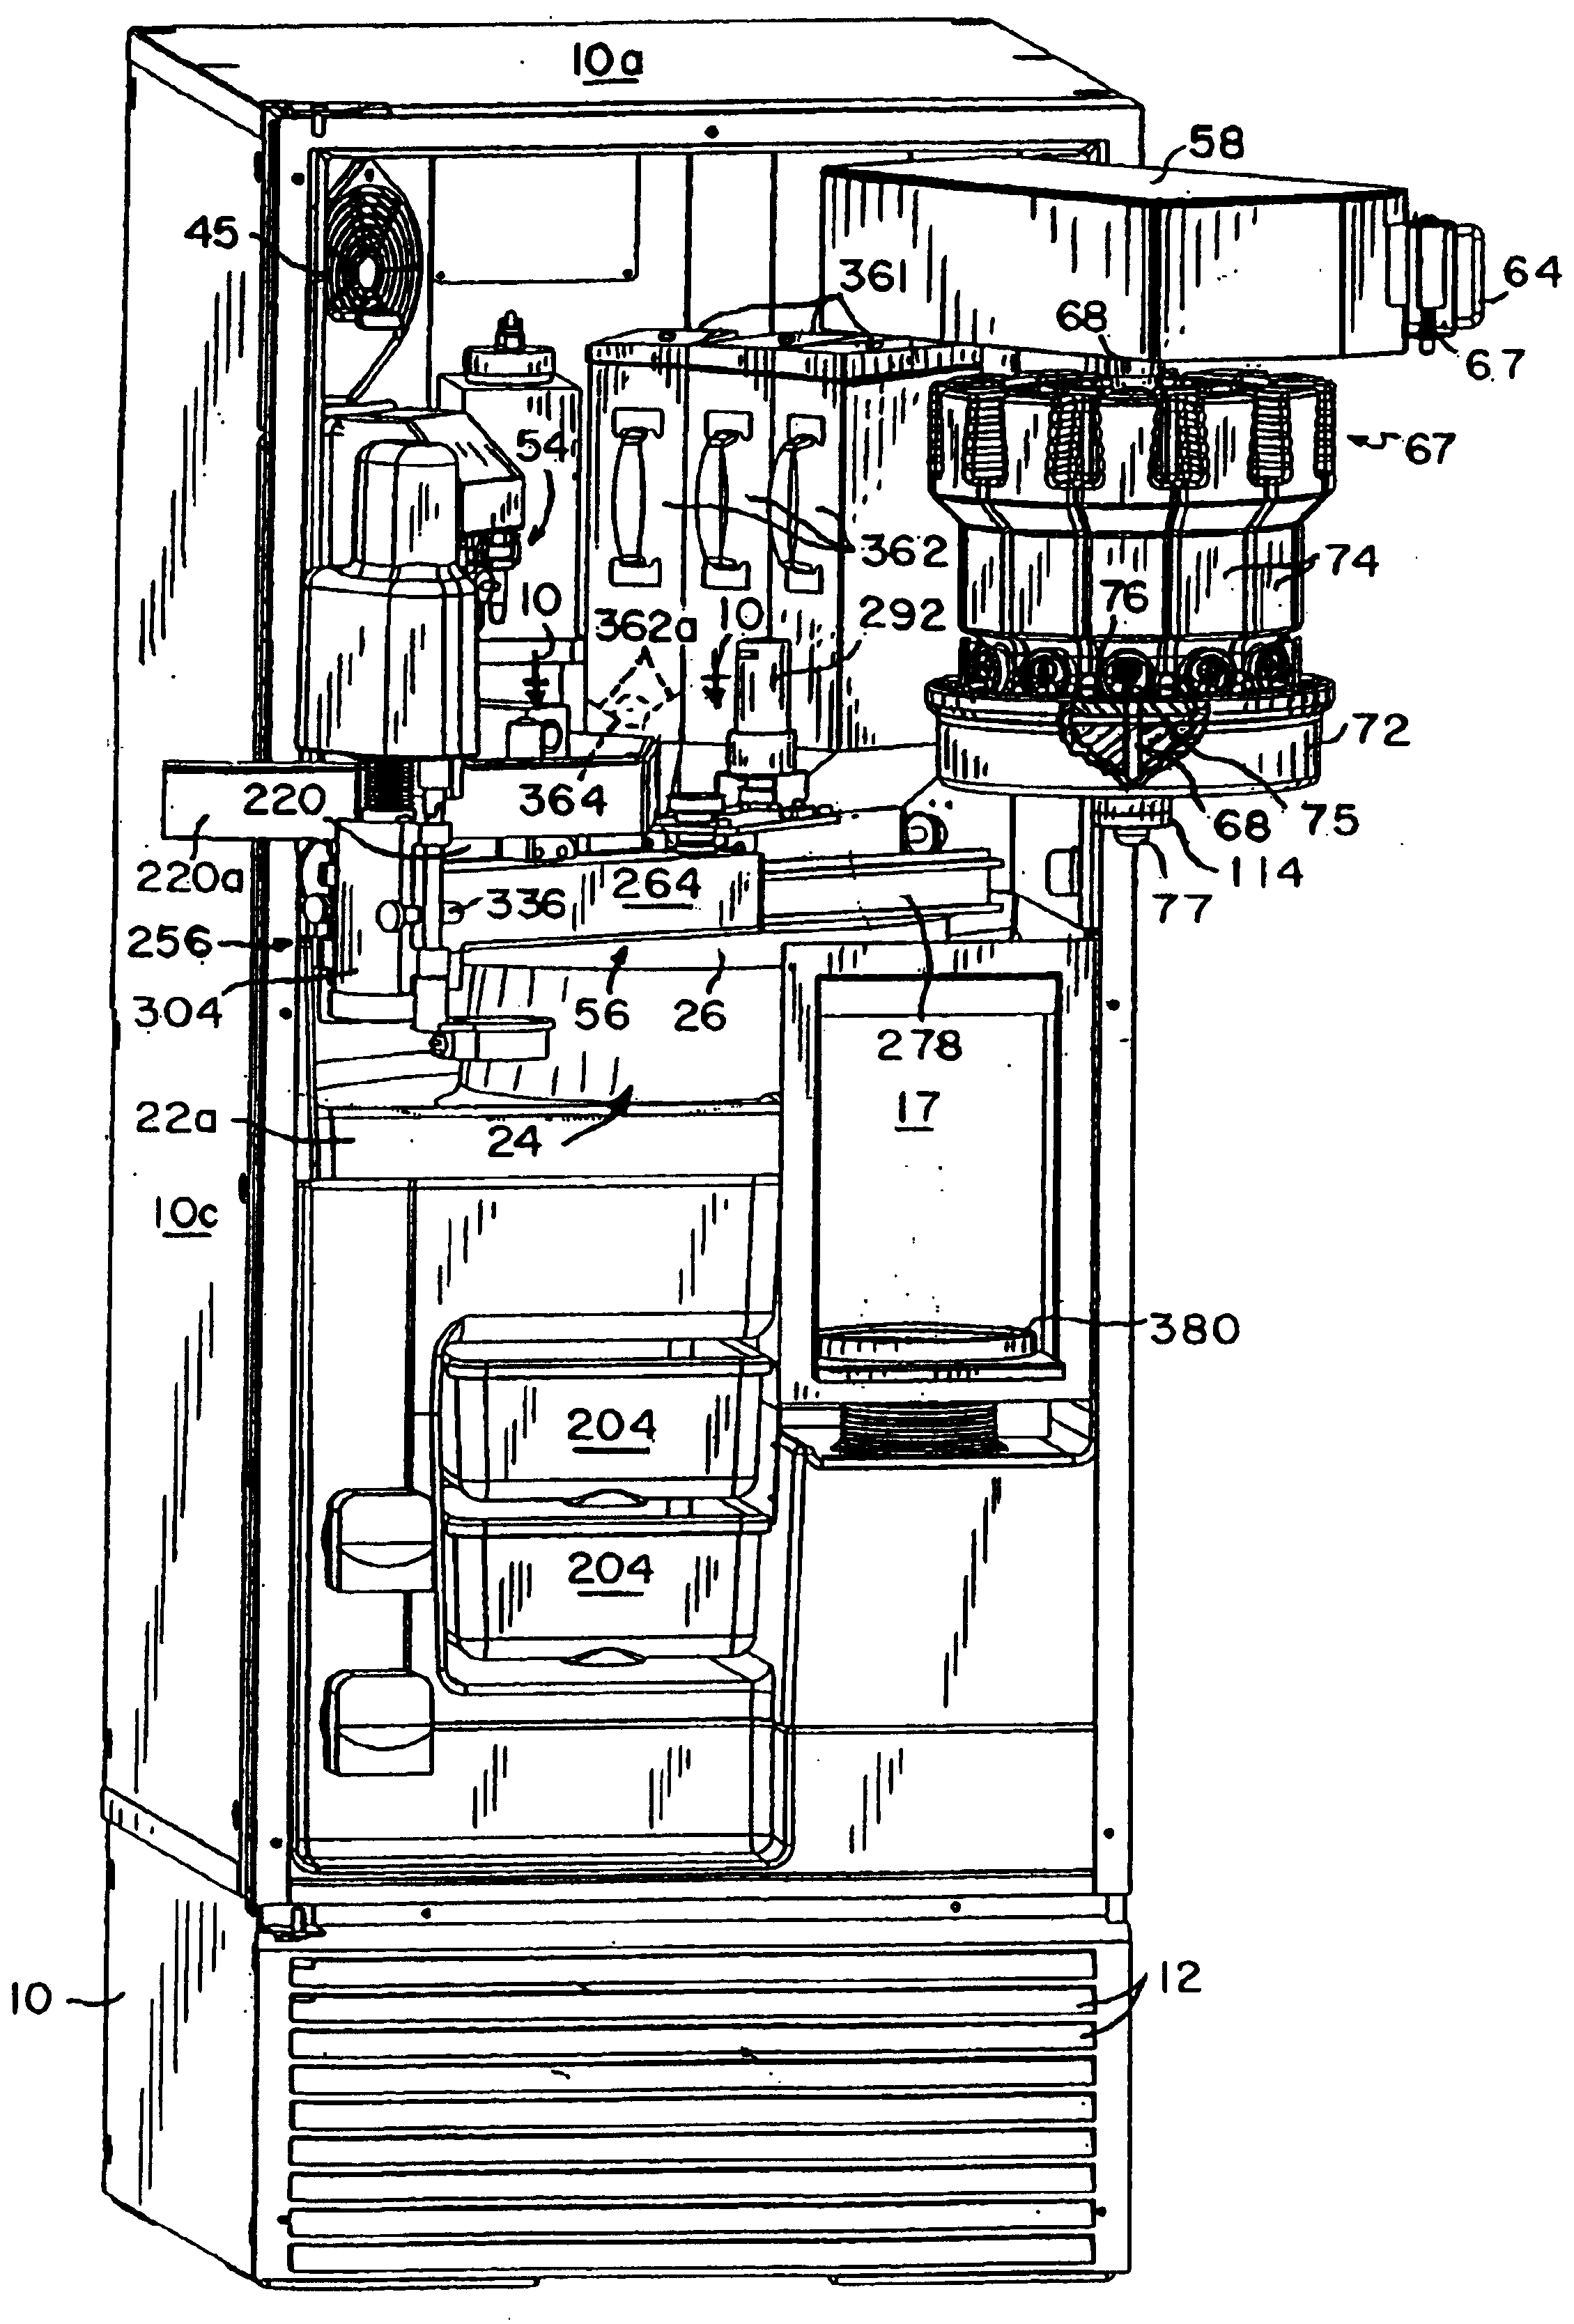 Method and apparatus for producing and dispensing an earated and/or blended food product